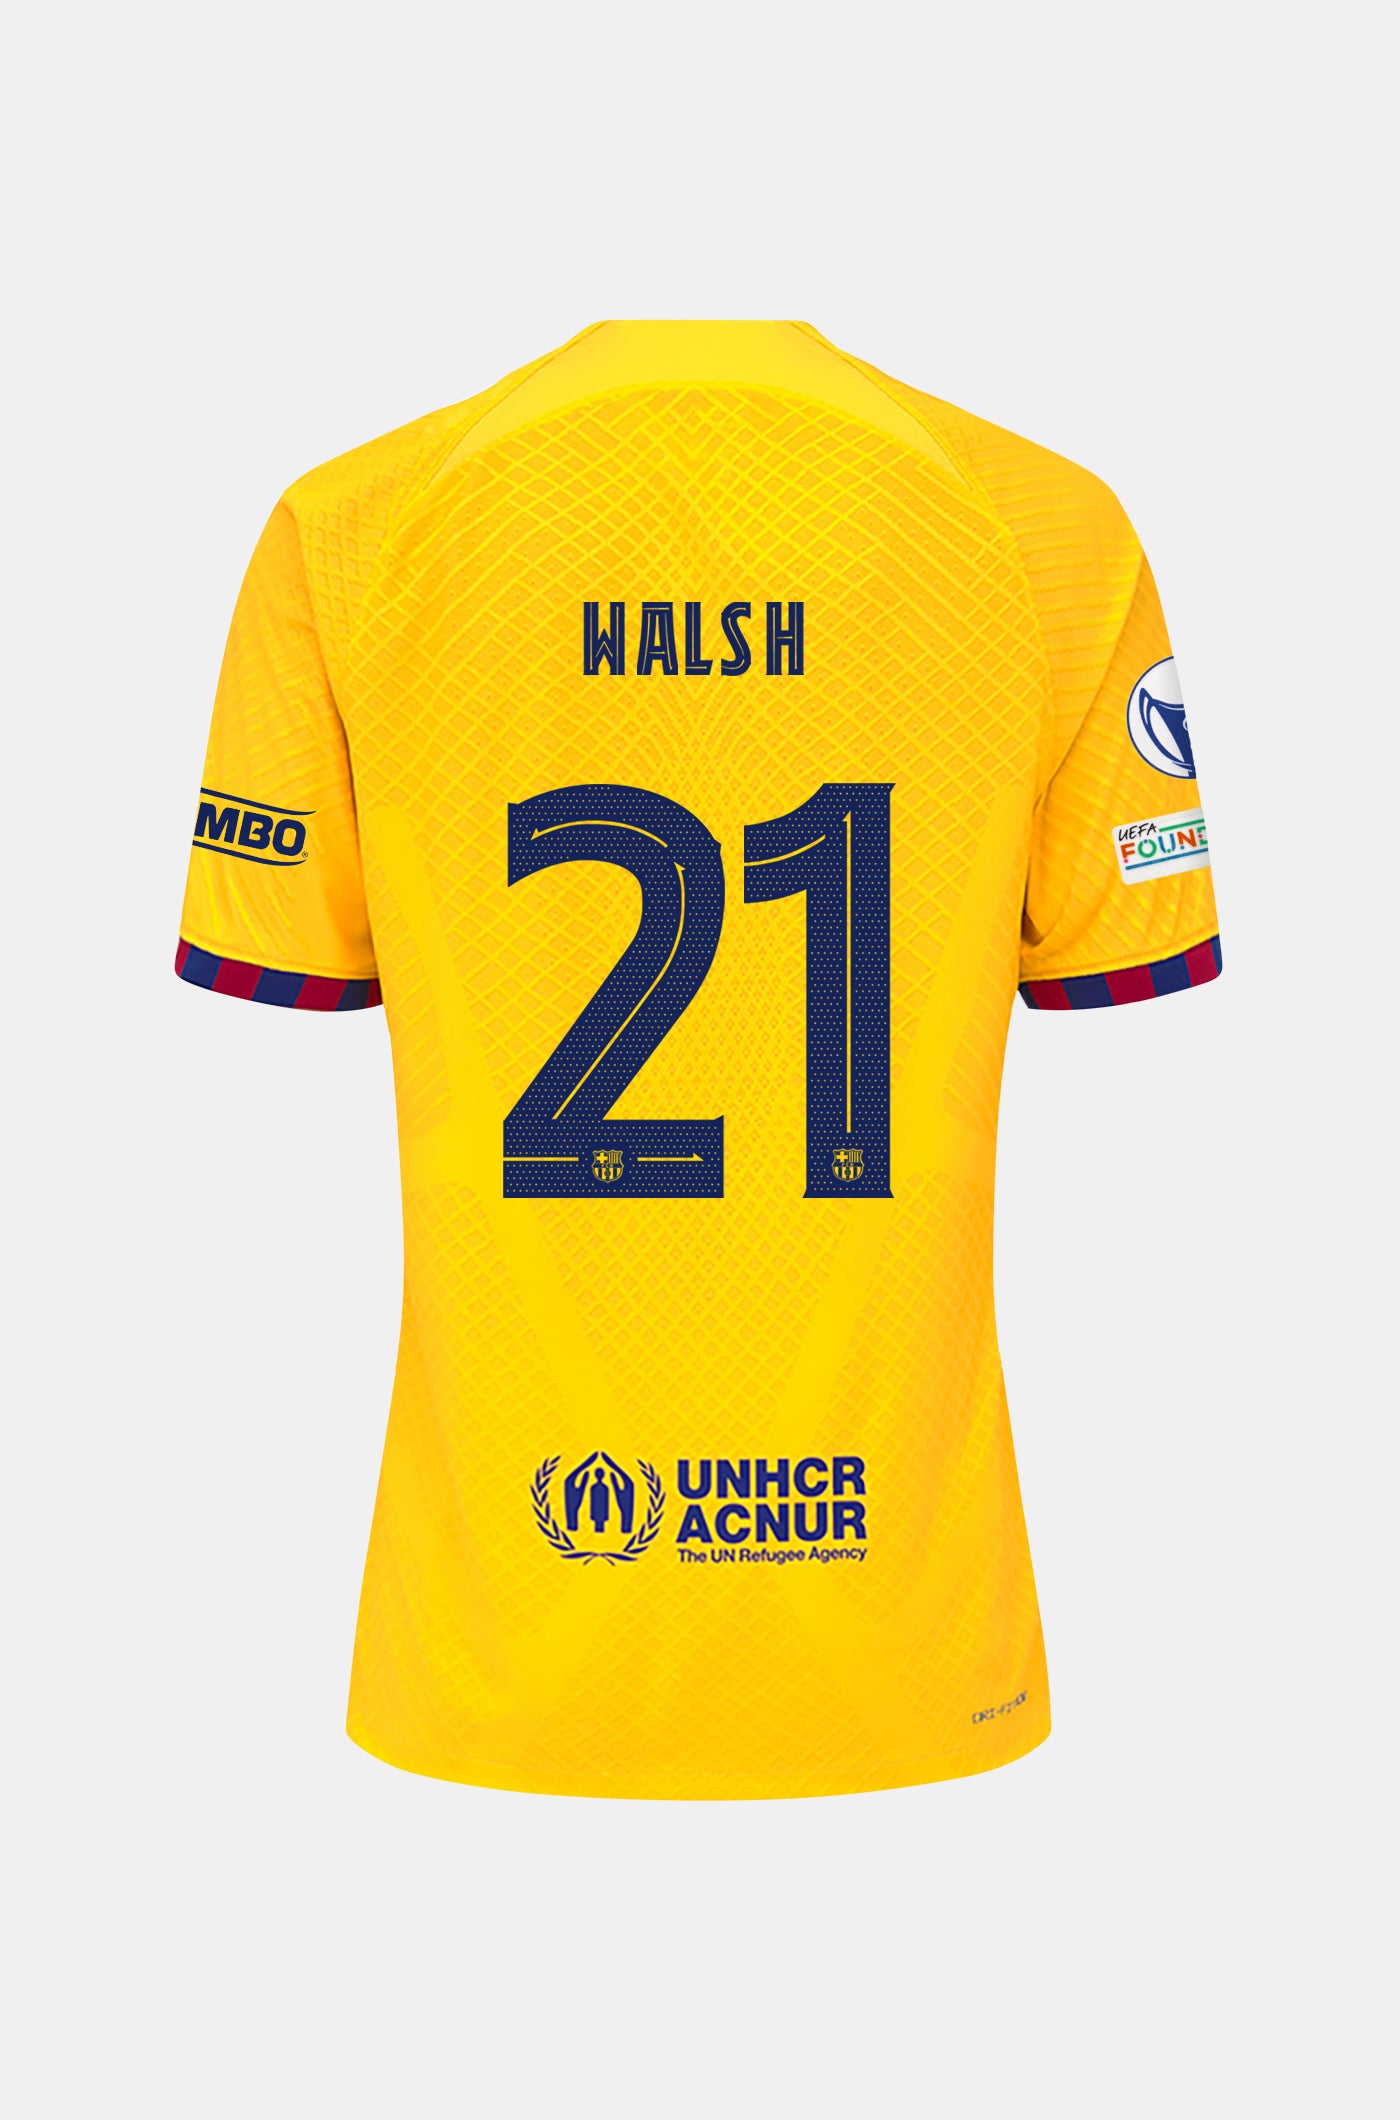 UWCL FC Barcelona fourth shirt 23/24 Player's Edition - WALSH